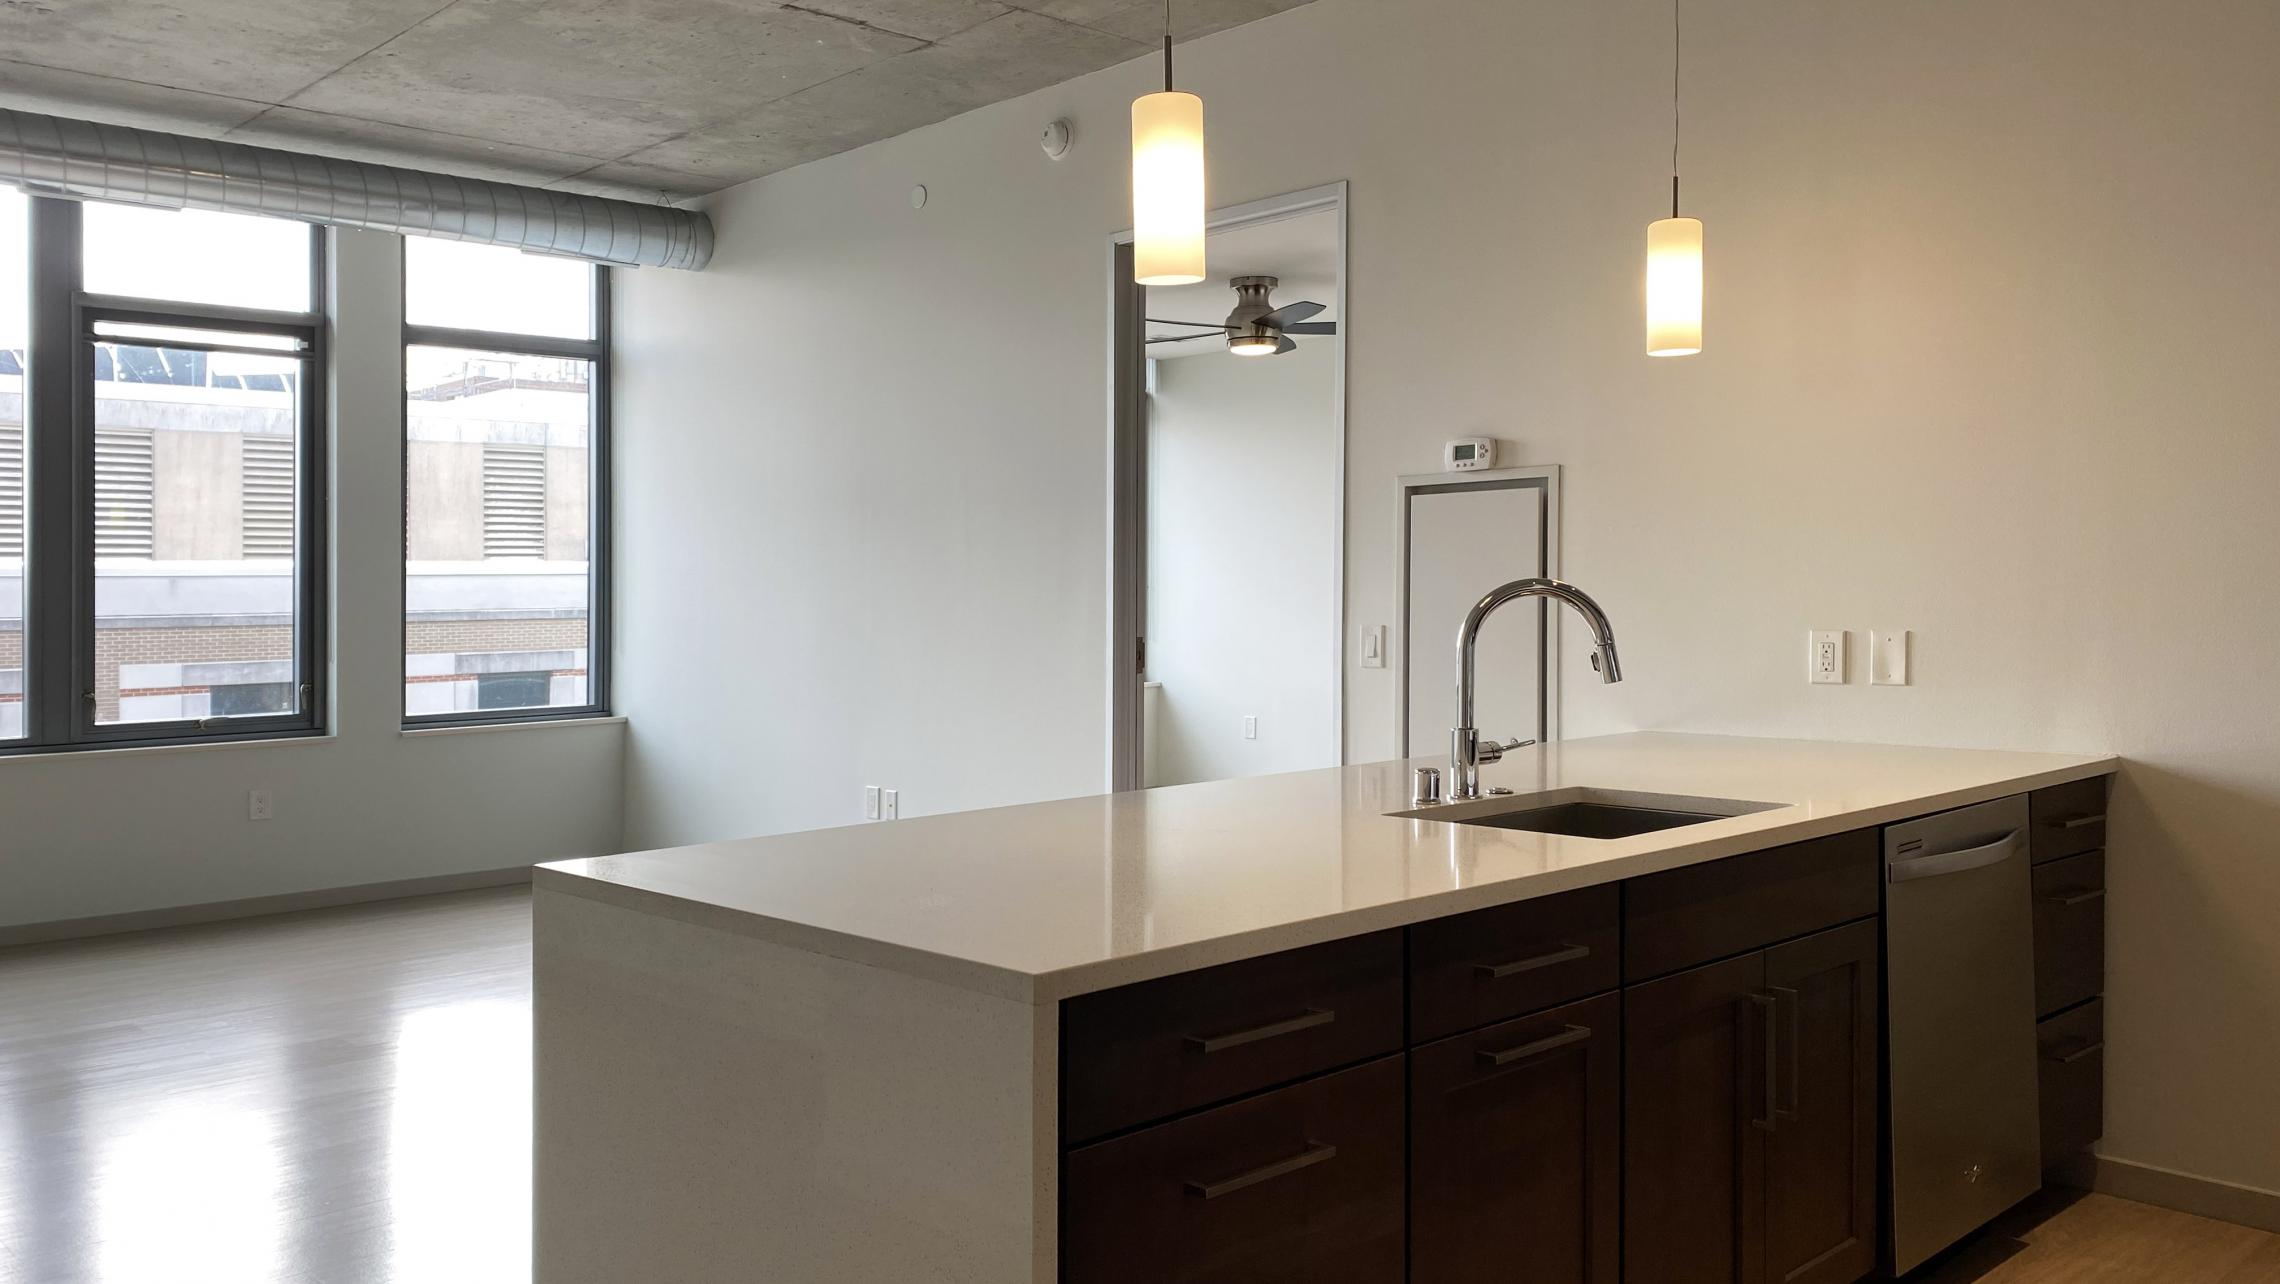 The-Pressman-Apartment-411-One-Bedroom-One-Bath-Kitchen-Living-Upscale-Luxurious-Modern-Exposed-Duct-Concrete-Capitol-Square-Downtown-Madison-Balcony-Terrace-Pets-Fitness-Lounge-Grill-Lifestyle